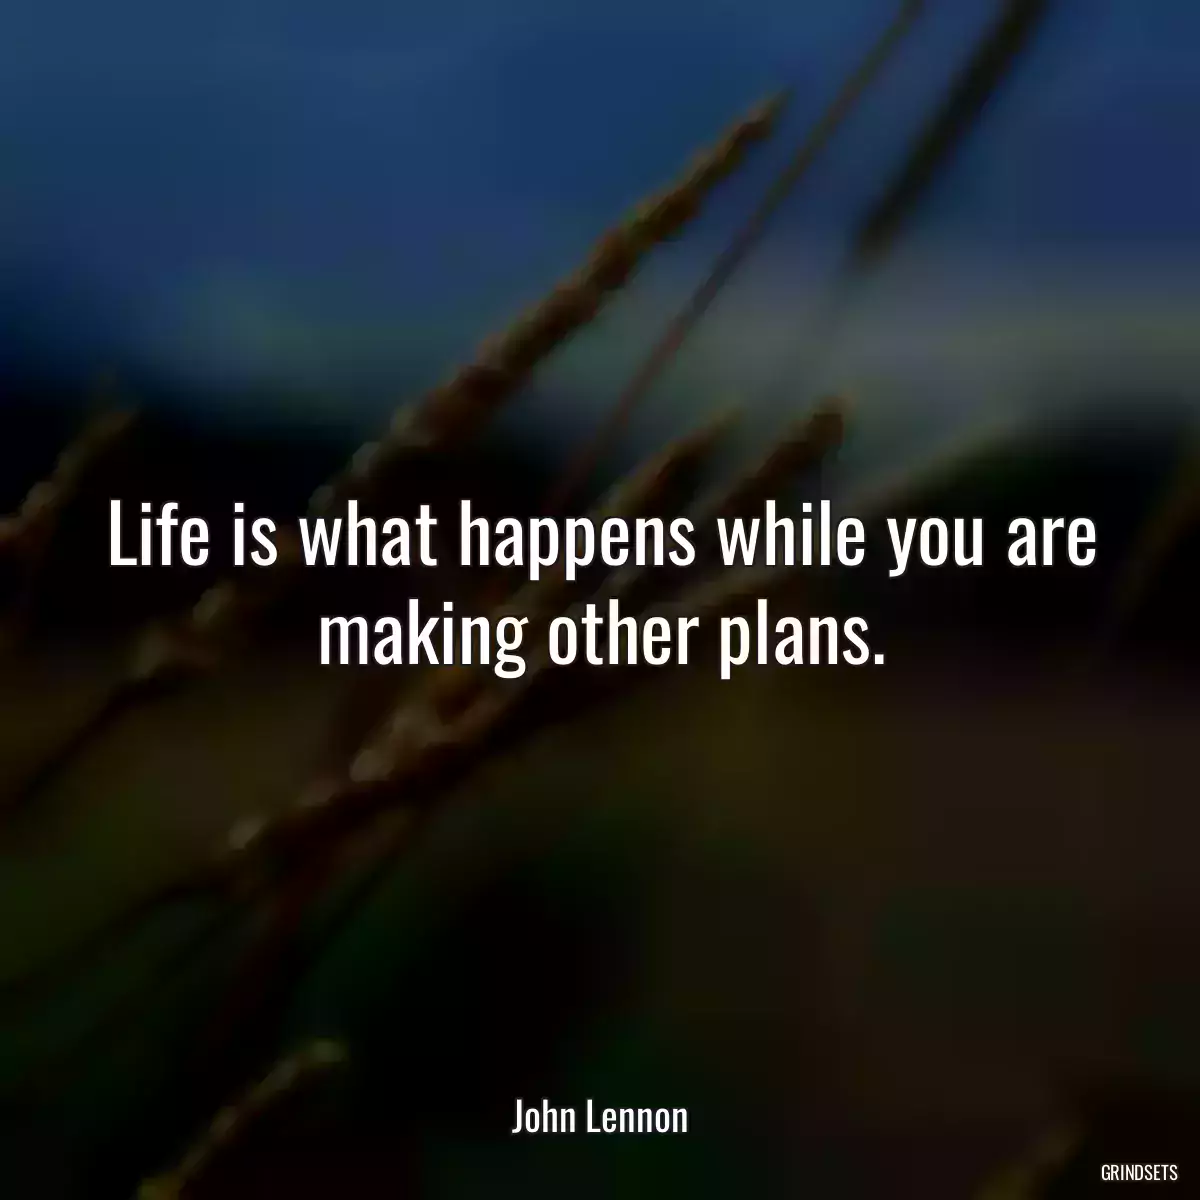 Life is what happens while you are making other plans.